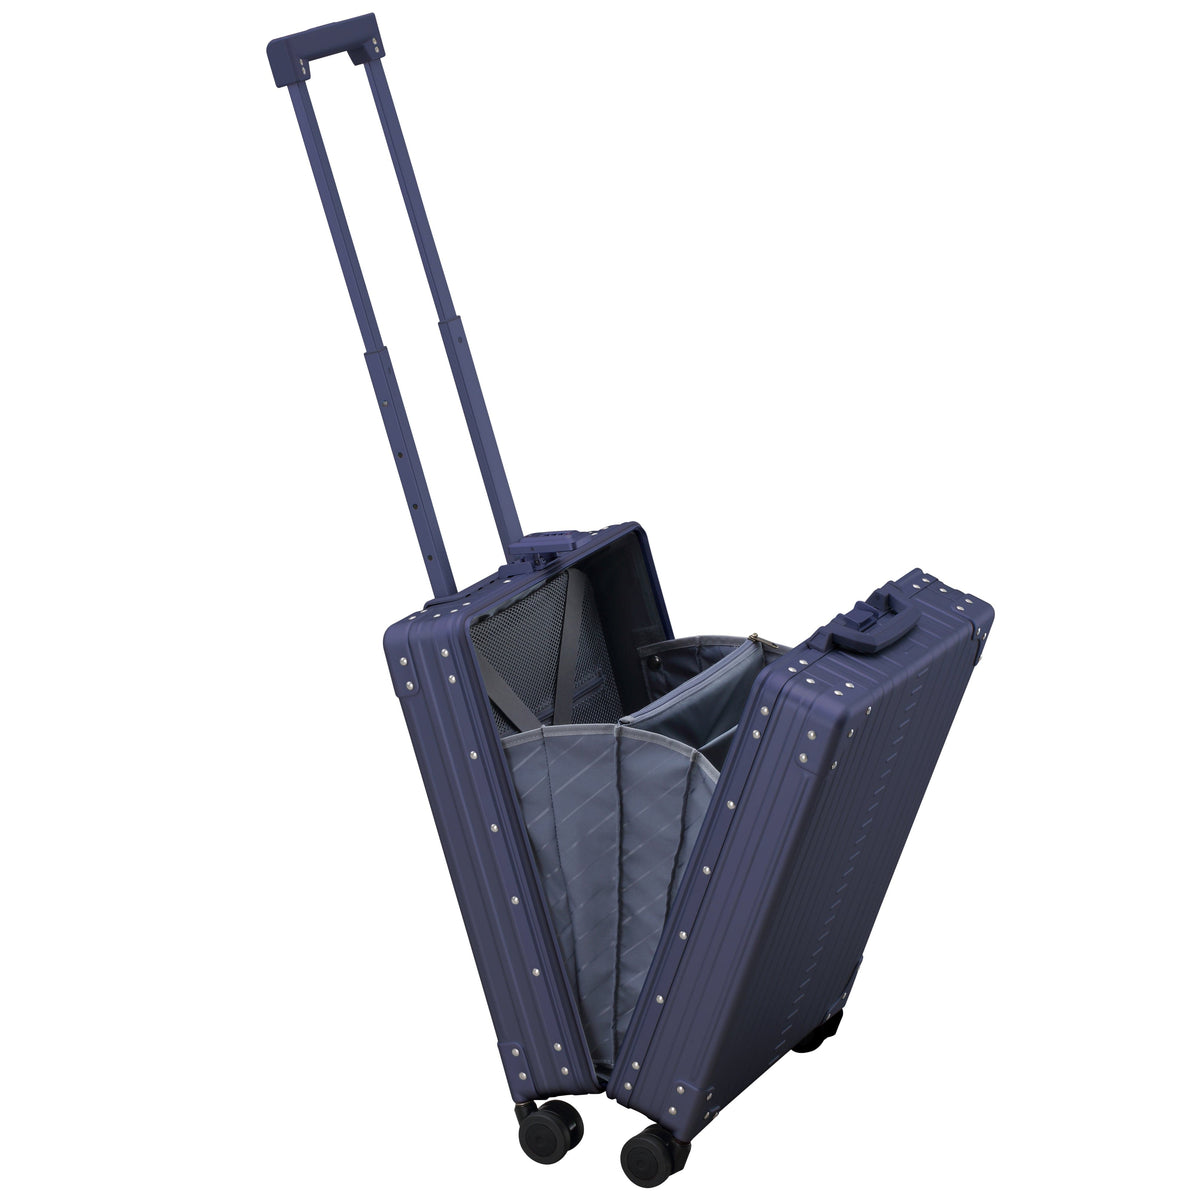 Aleon 21" Vertical Overnight Business Carry-On